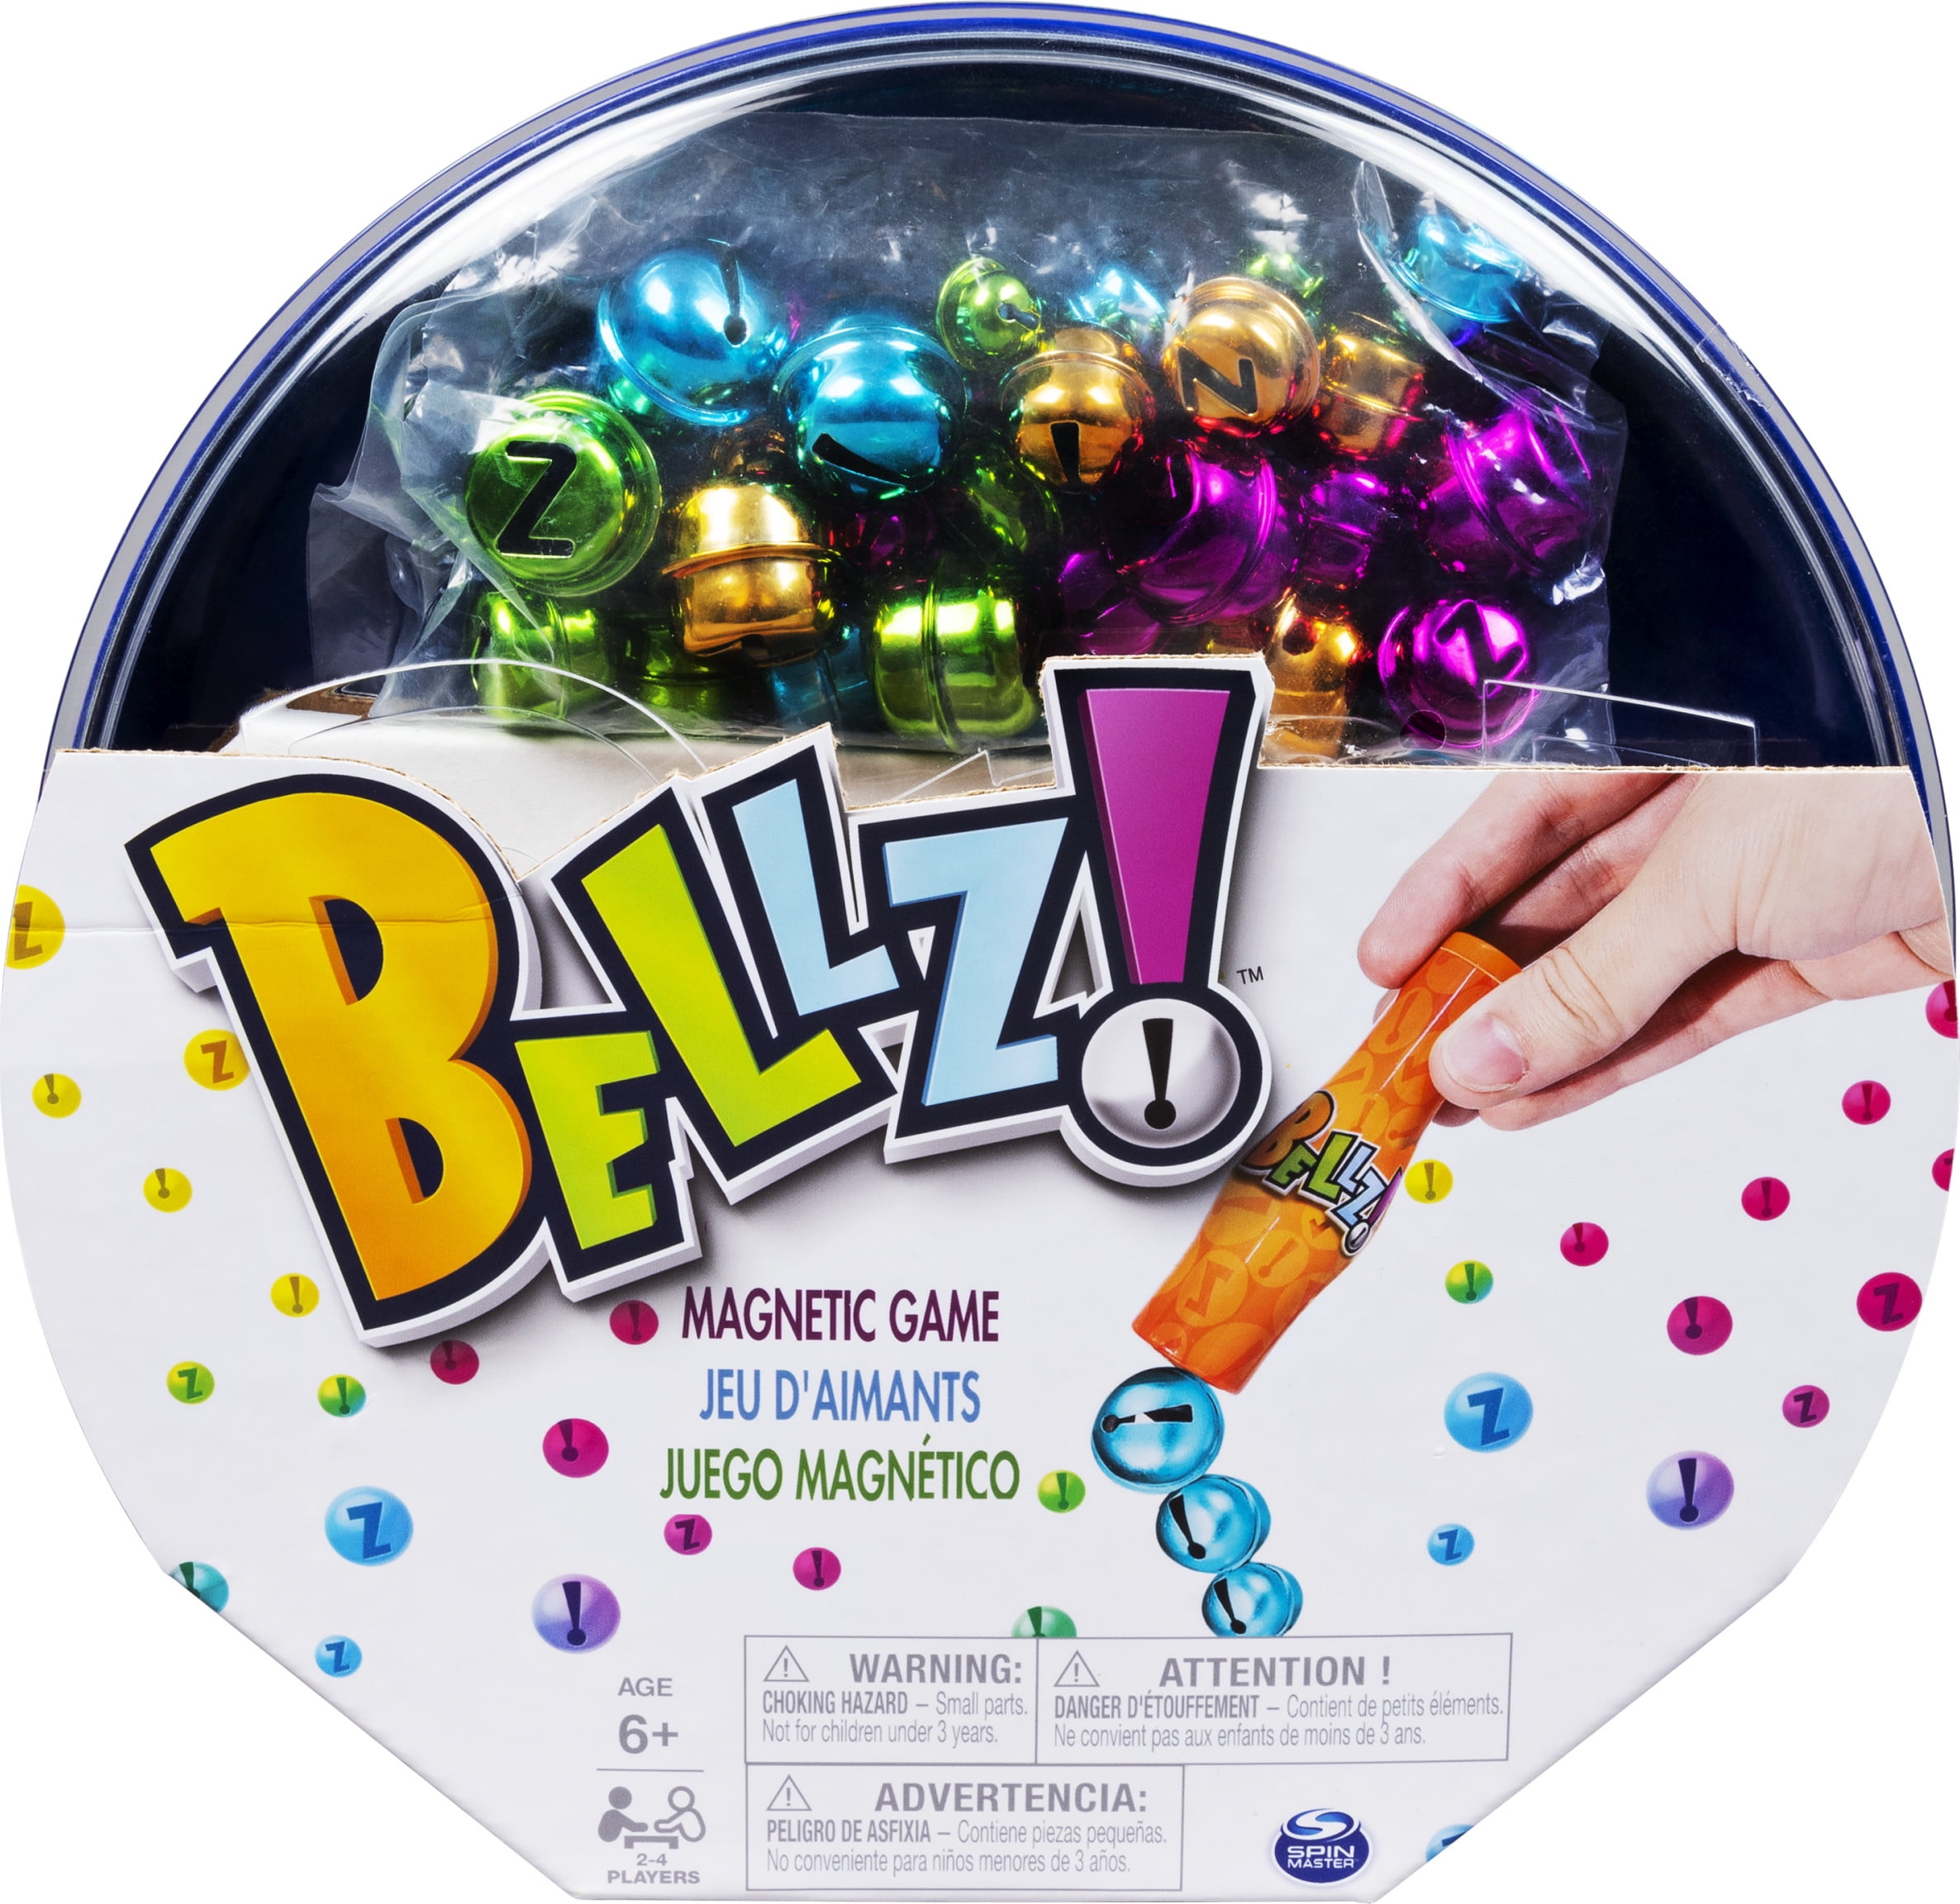 Bellz! Board Game Review and Rules - Geeky Hobbies